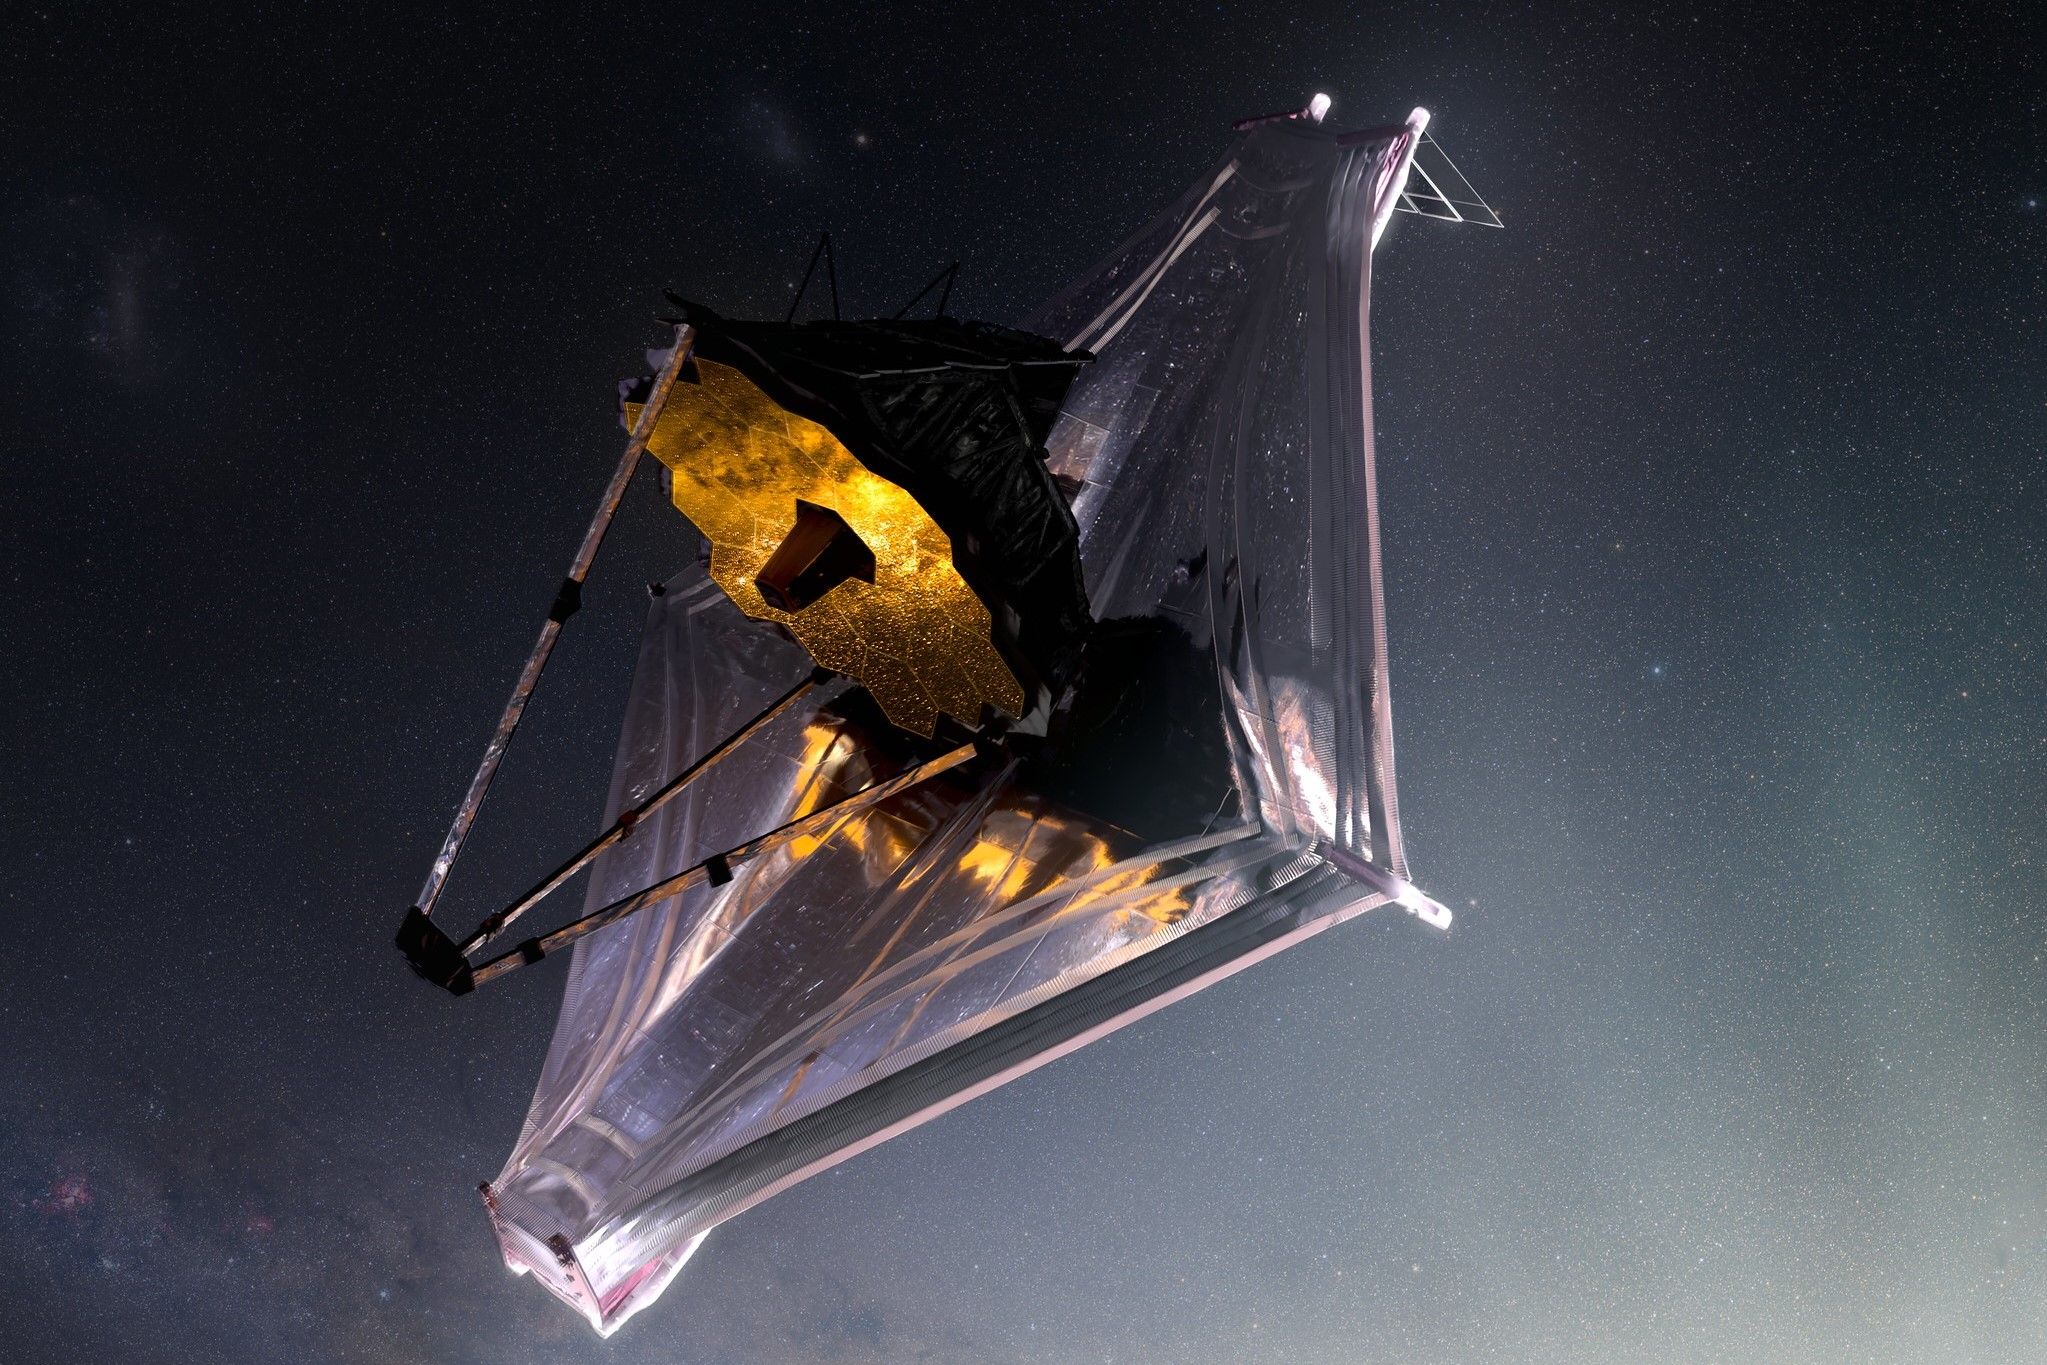 Download These Super High Res Webb Telescope Image For An Out Of This World Wallpaper